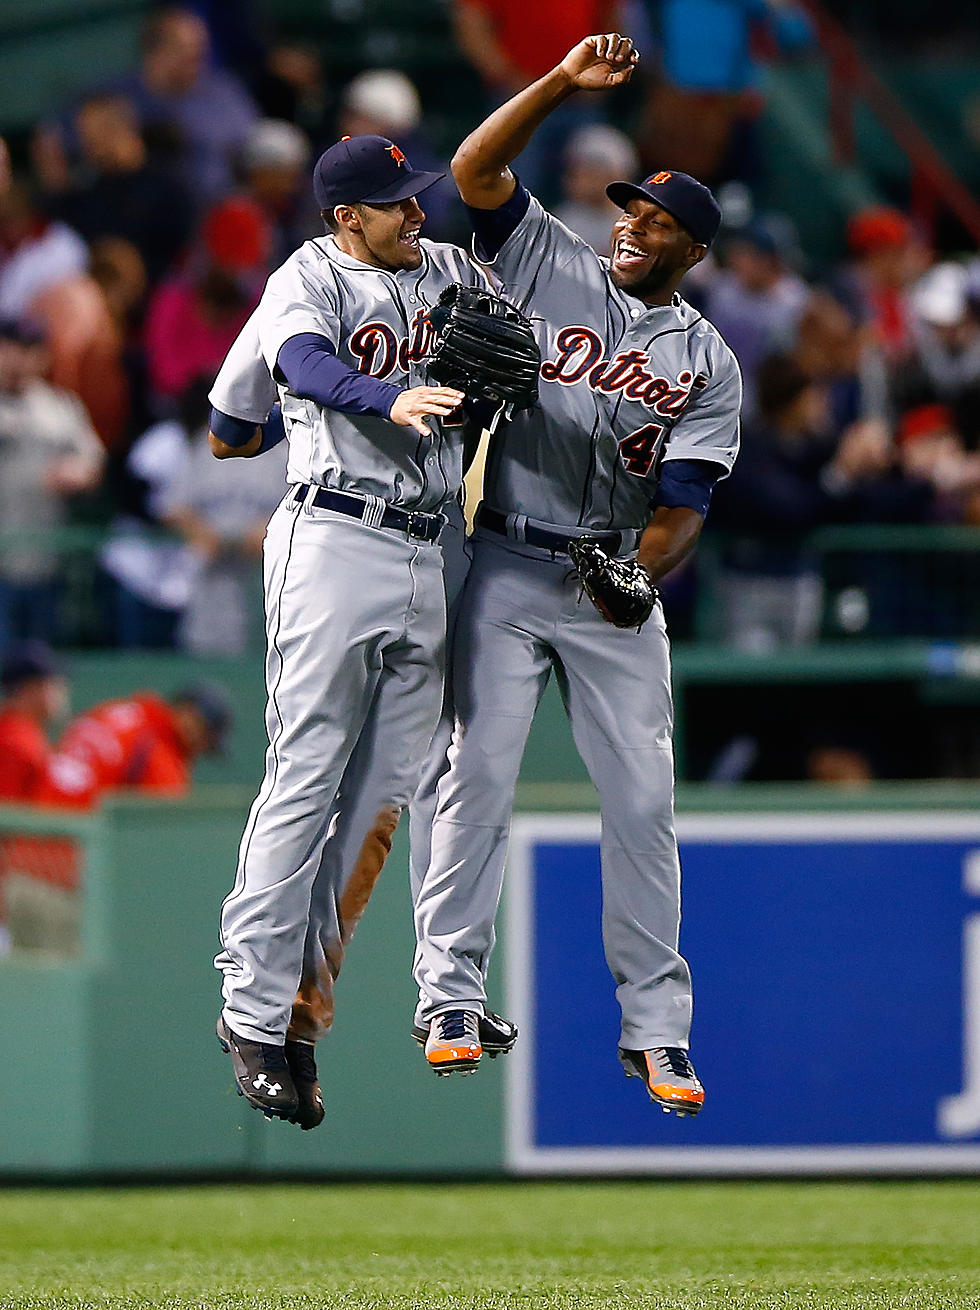 Tigers Sweep The Red Sox, 6-2